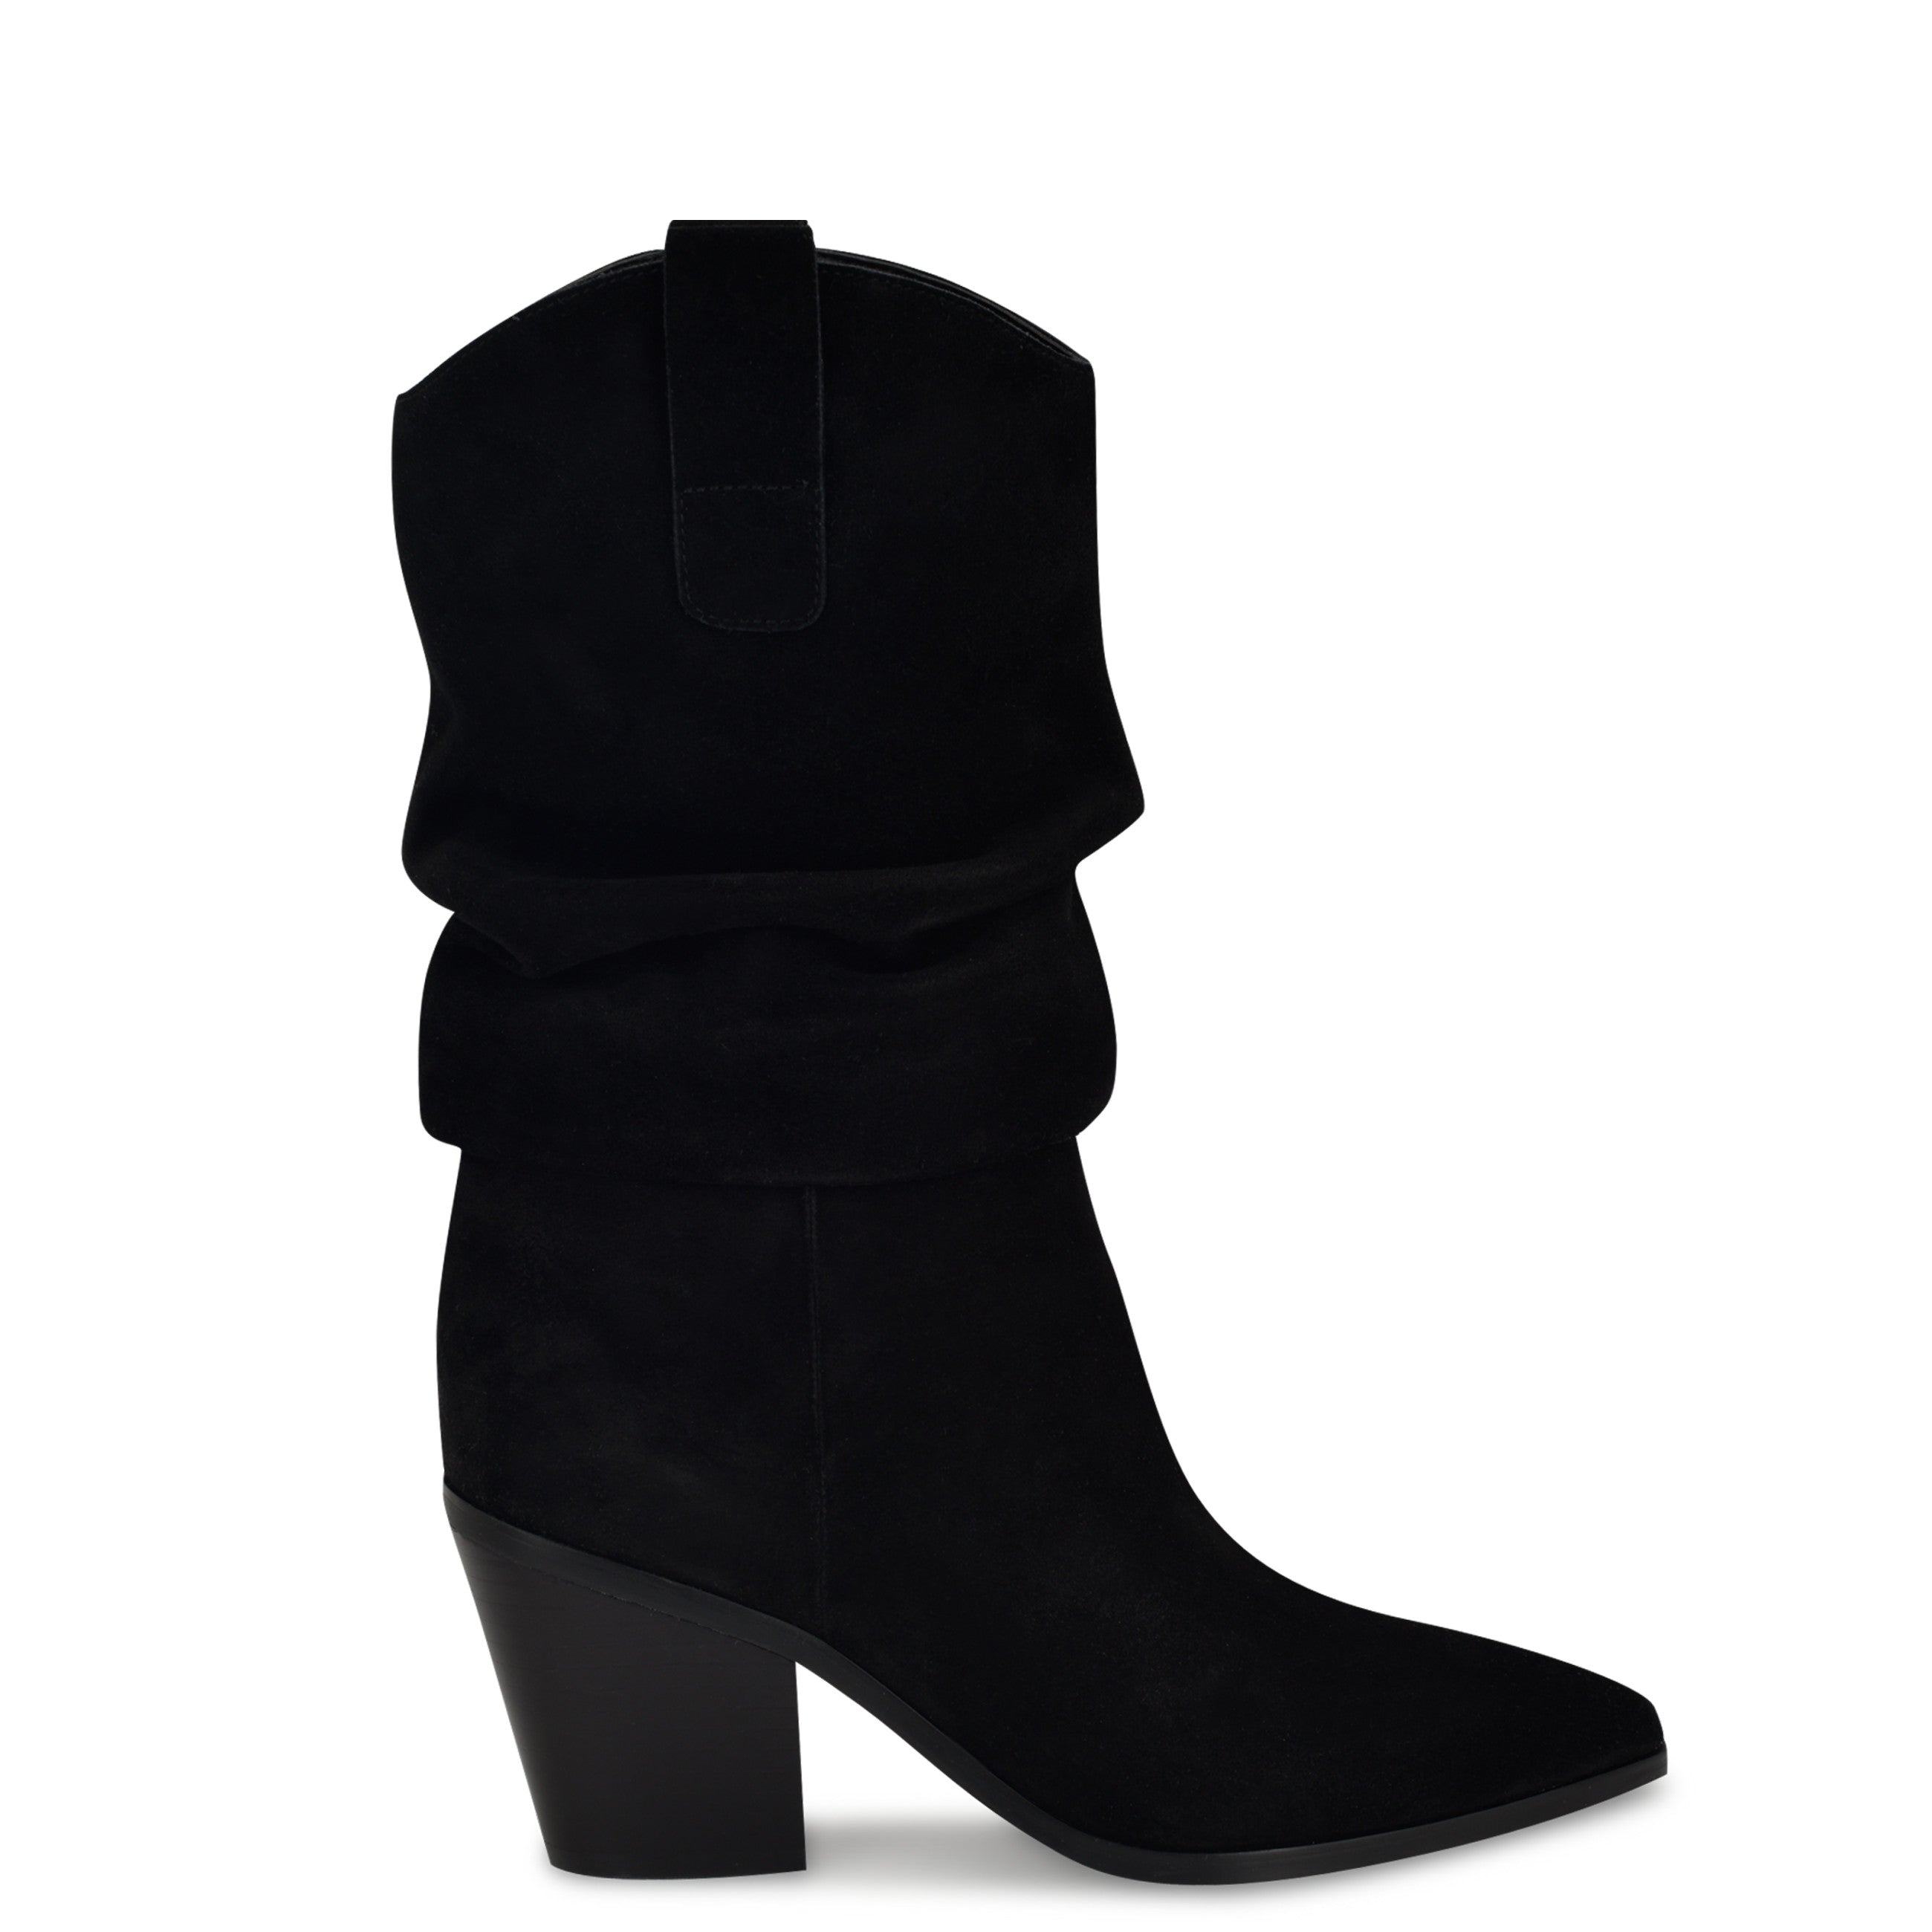 Kadon Tailored Slouch Boots